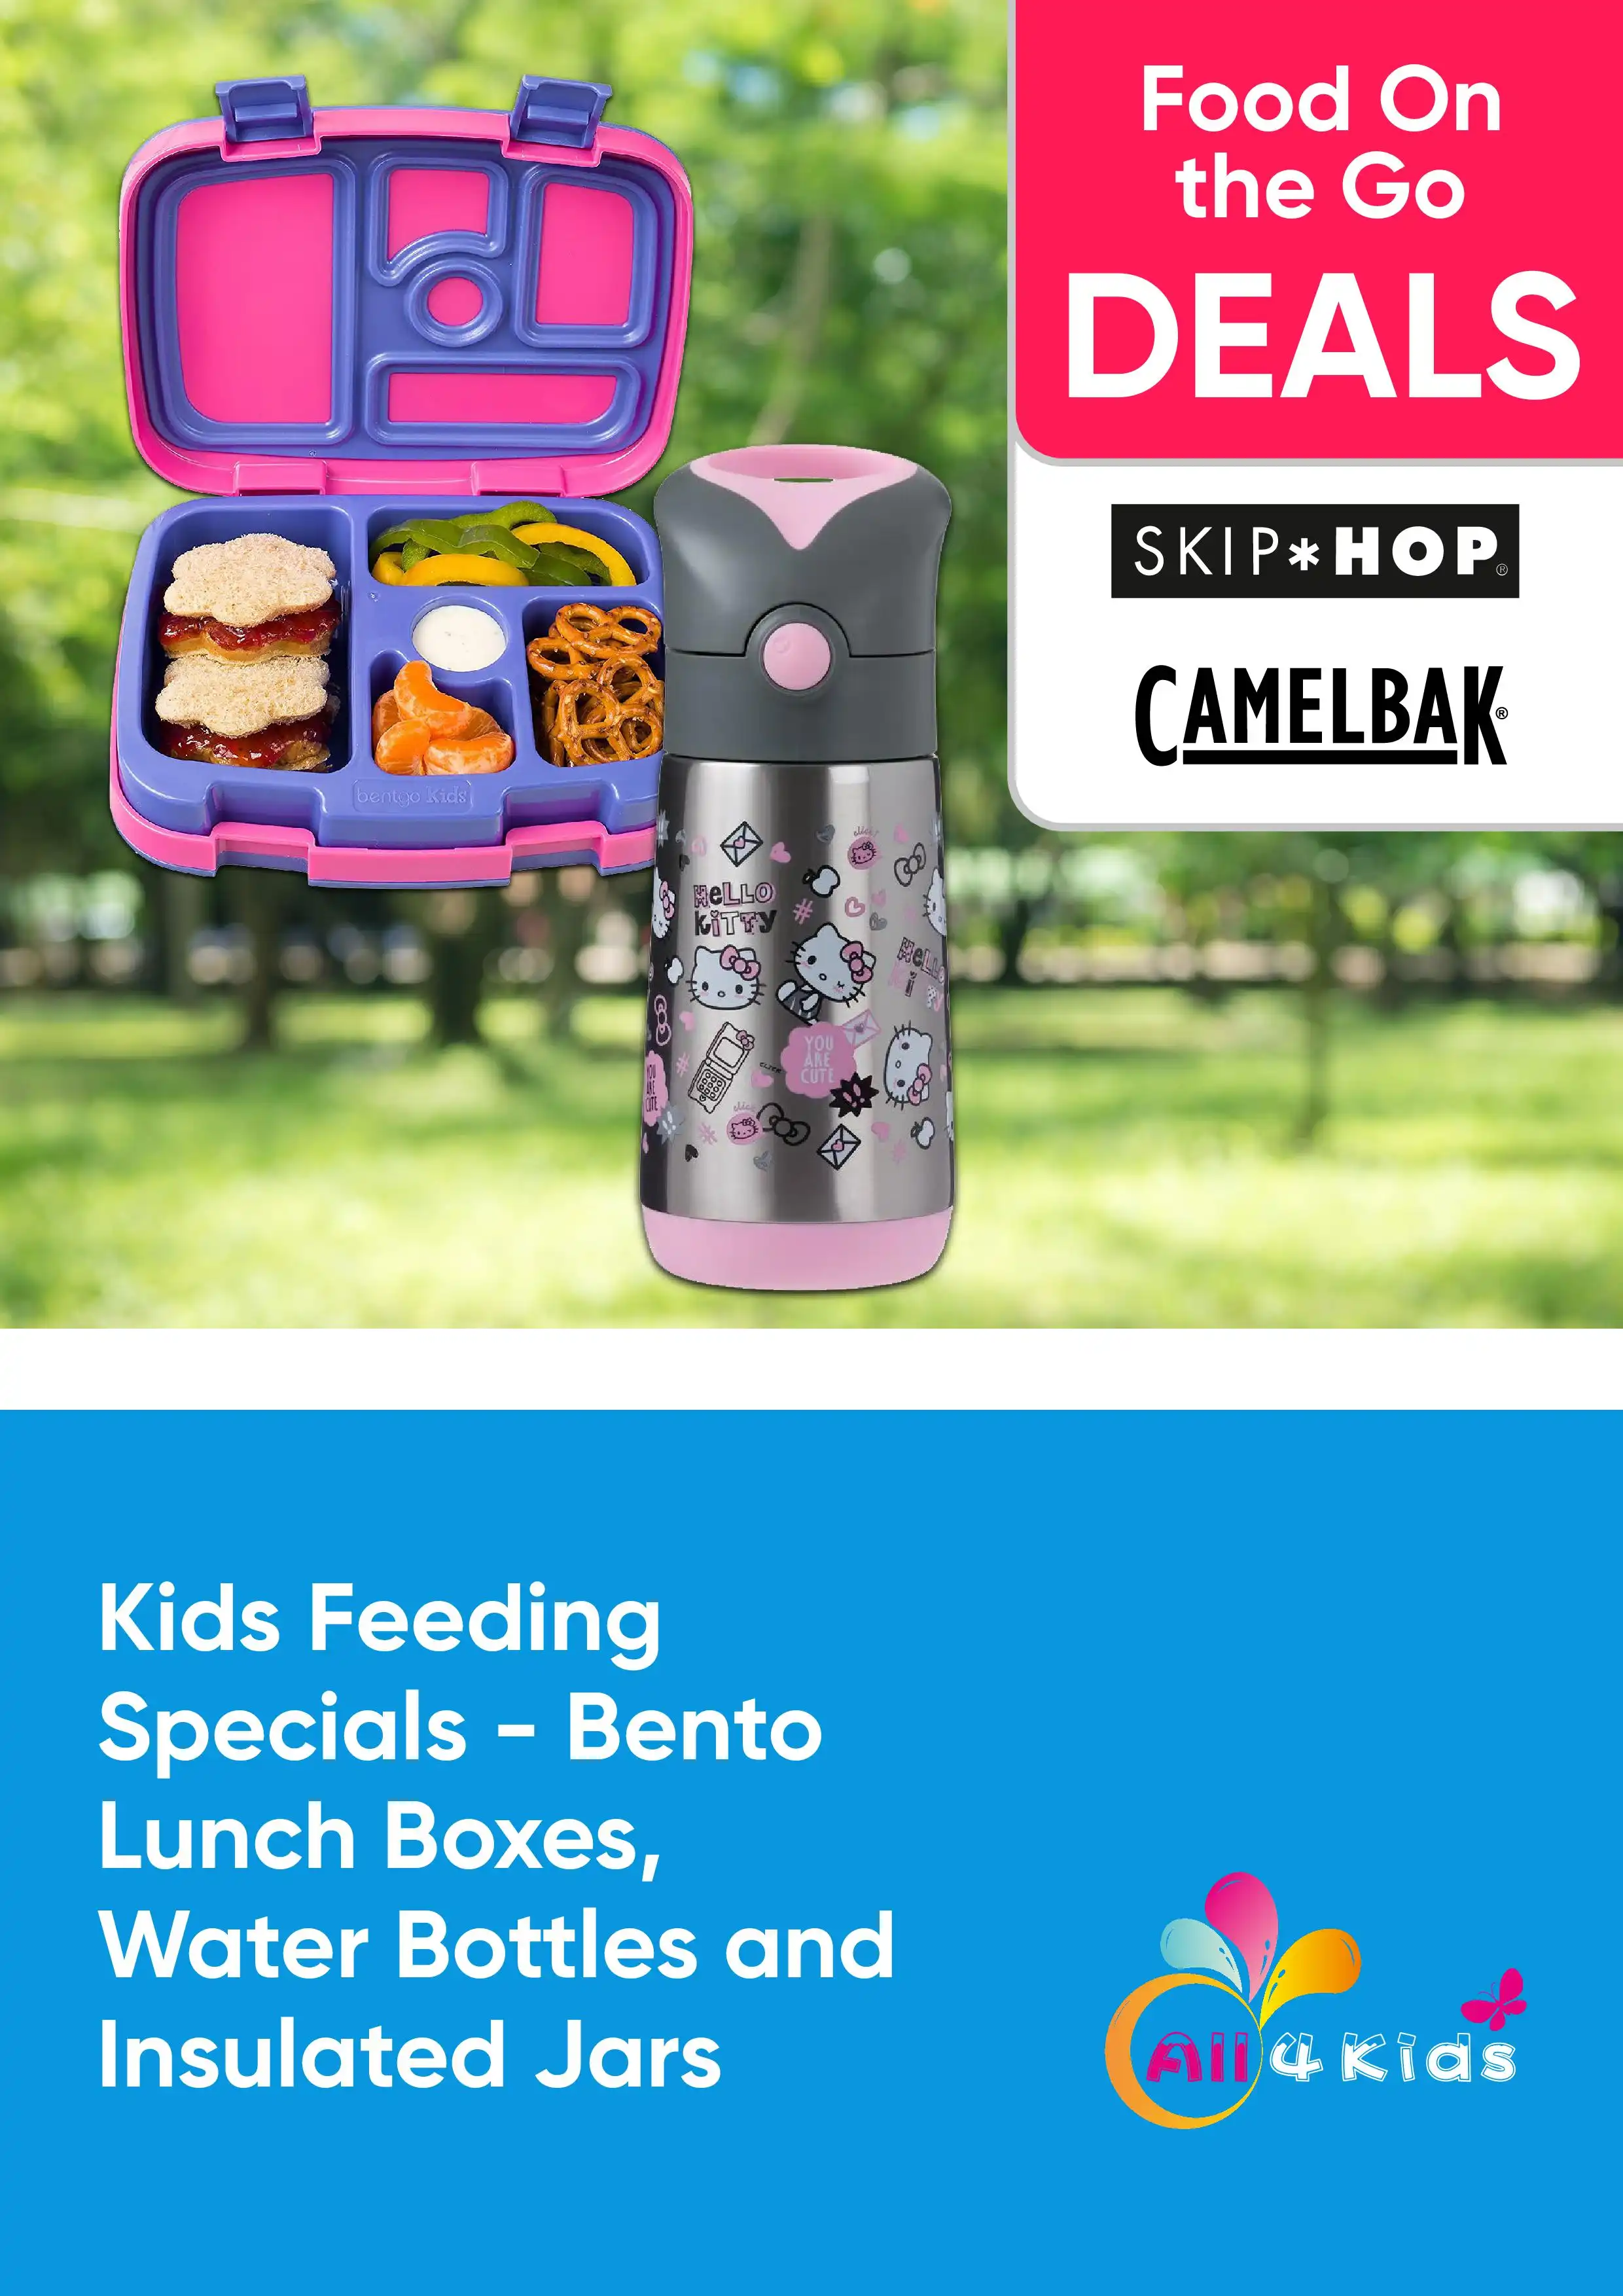 Kids Feeding Specials - Bento Lunch Boxes, Water Bottles and Insulated Jars